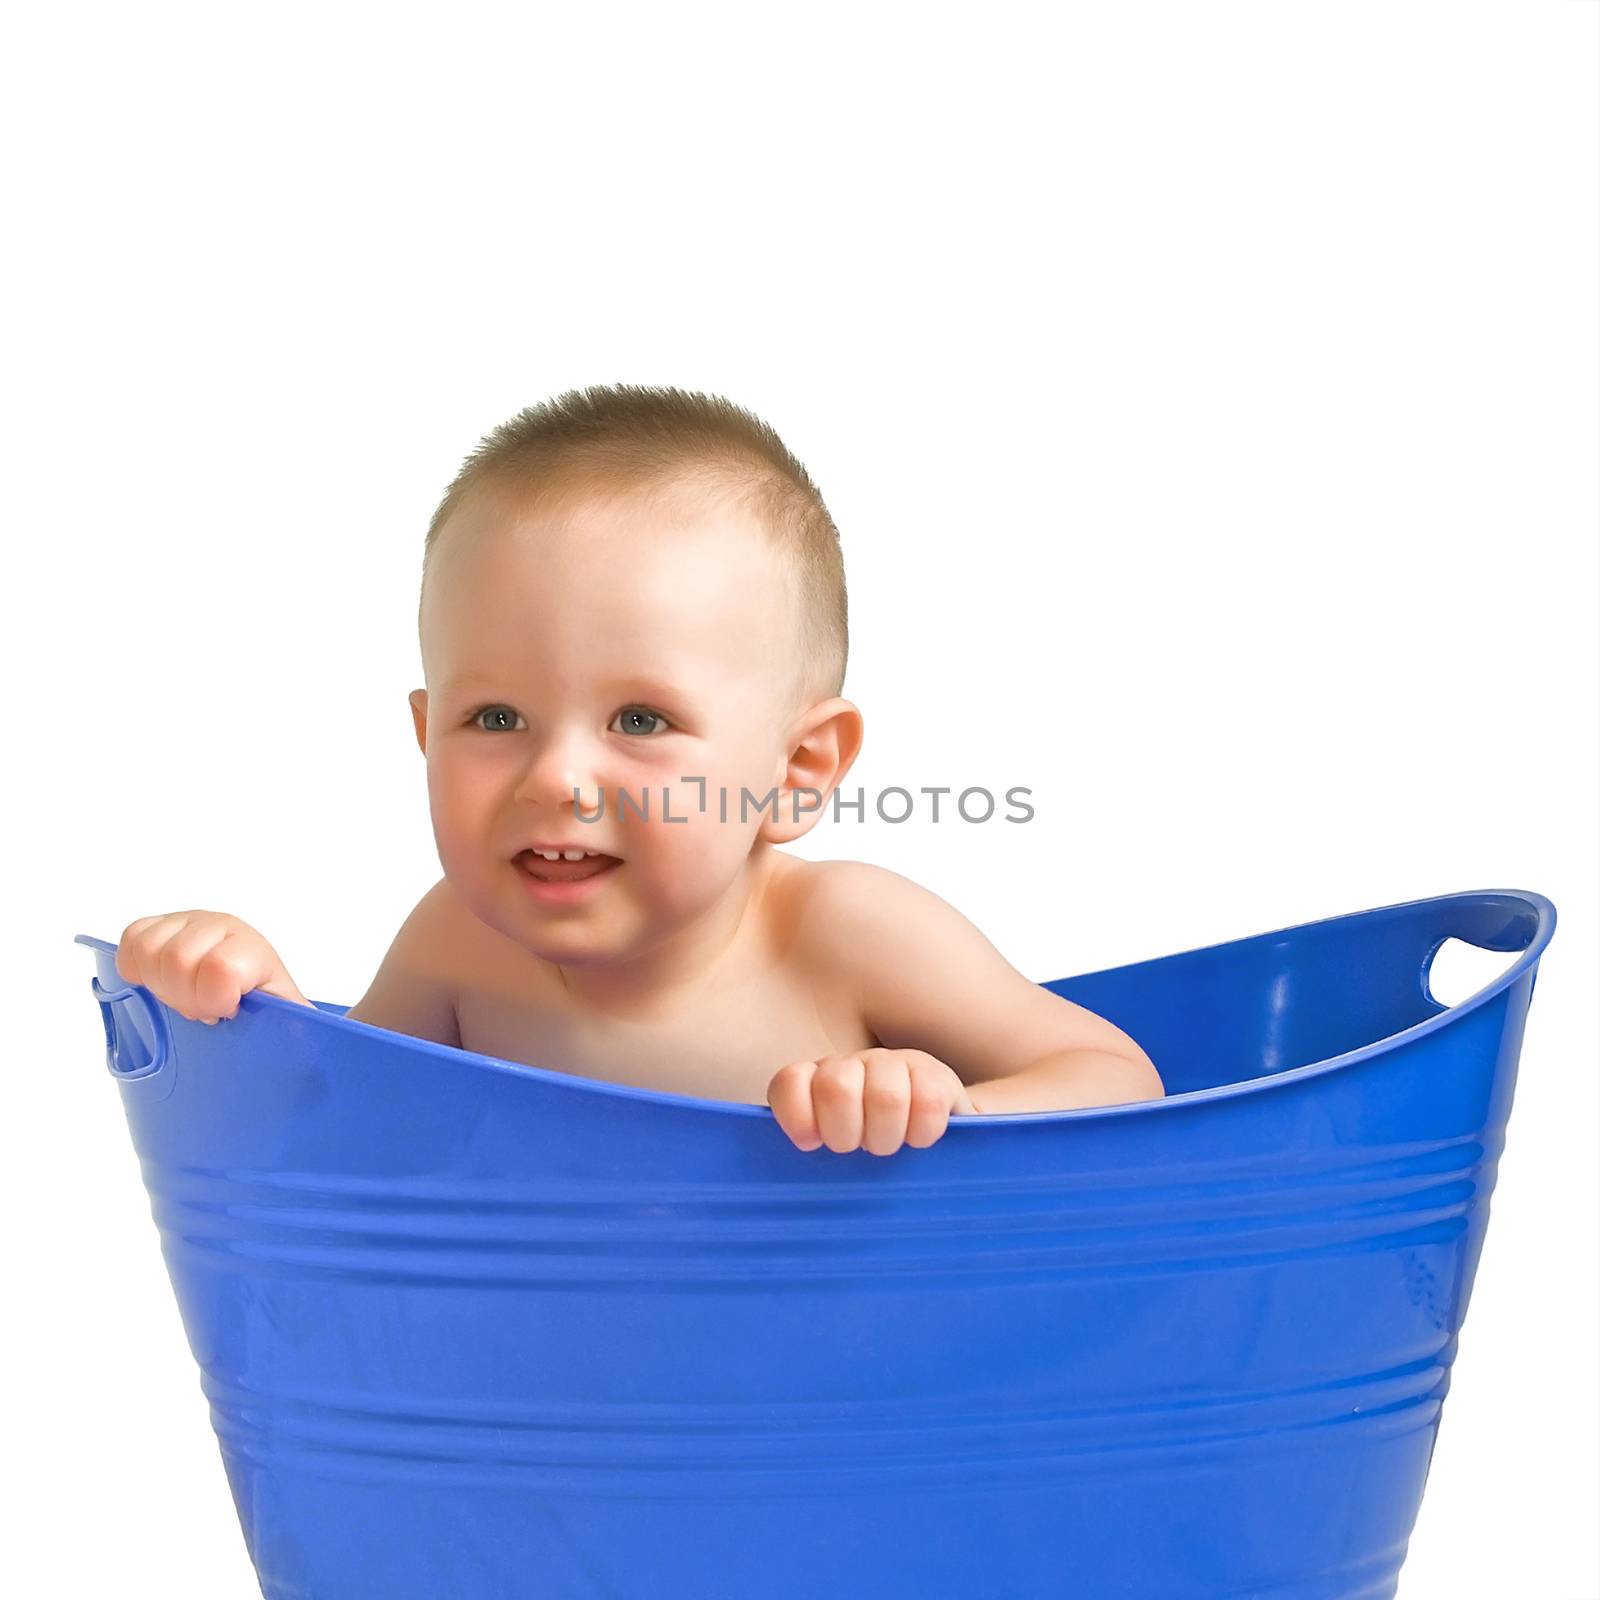 Sweet baby in blue tub by rcarner